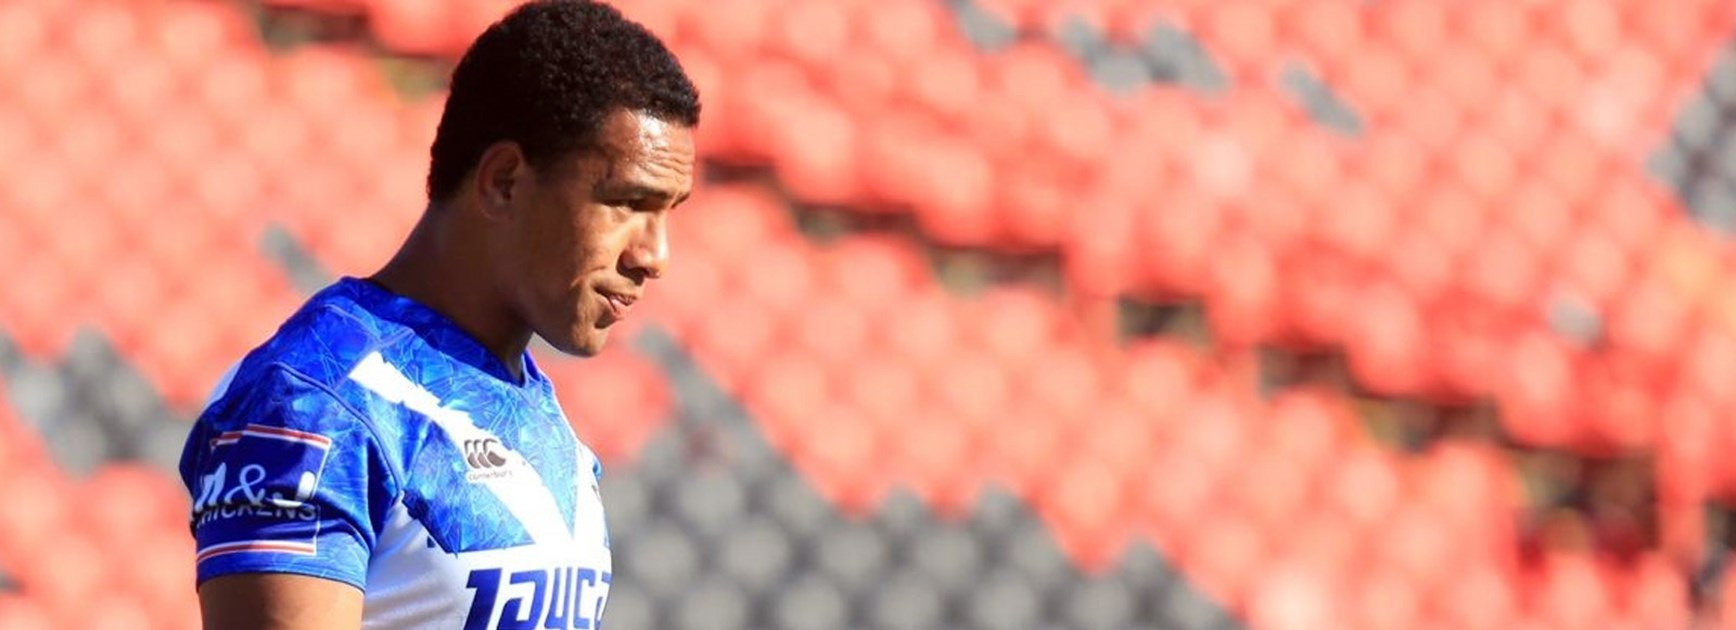 Bulldogs recruit Will Hopoate will be fit to play in Round 1.